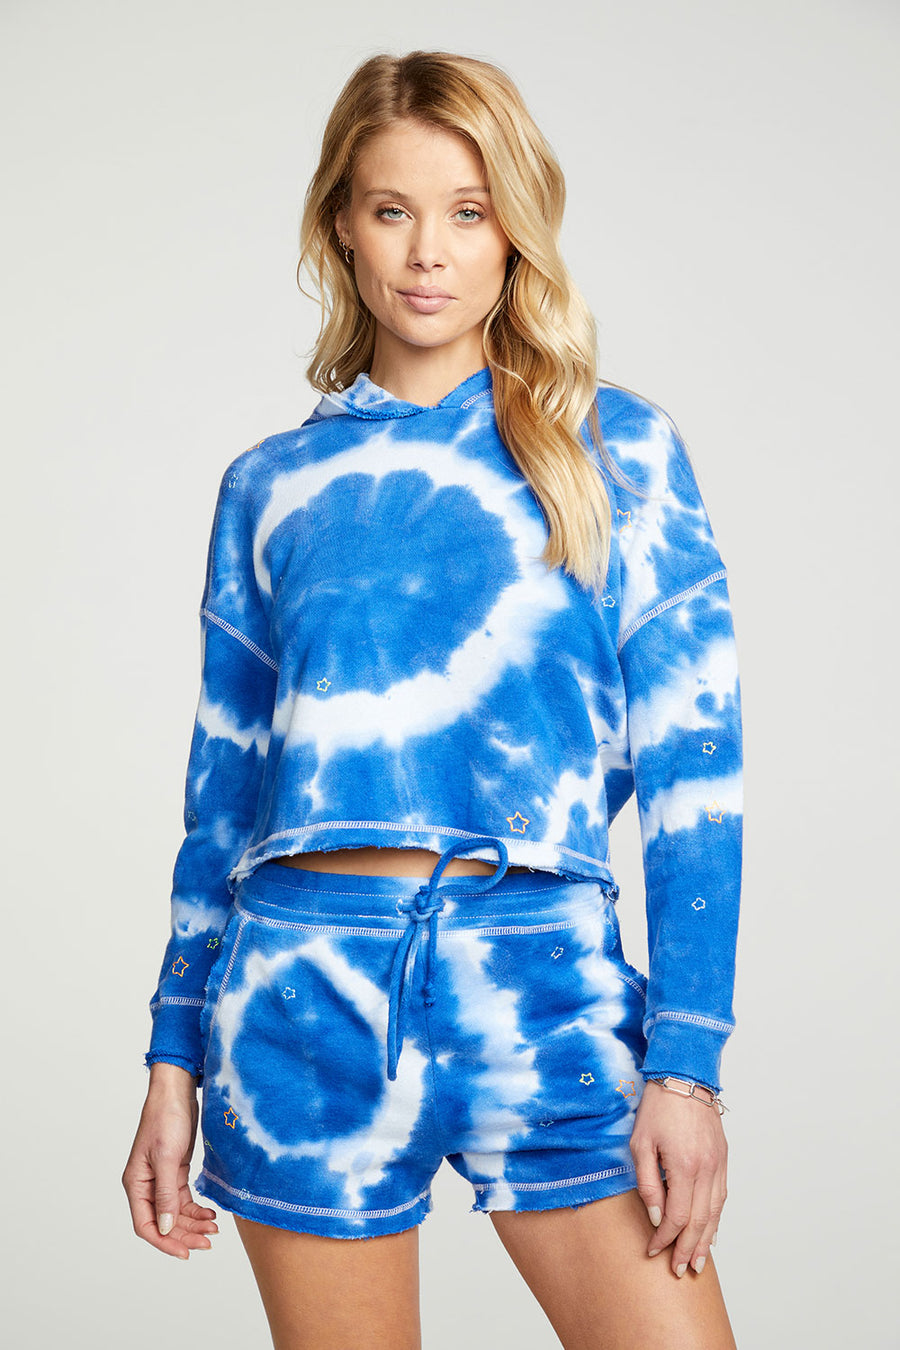 Tie Dye Star Shorts WOMENS - chaserbrand